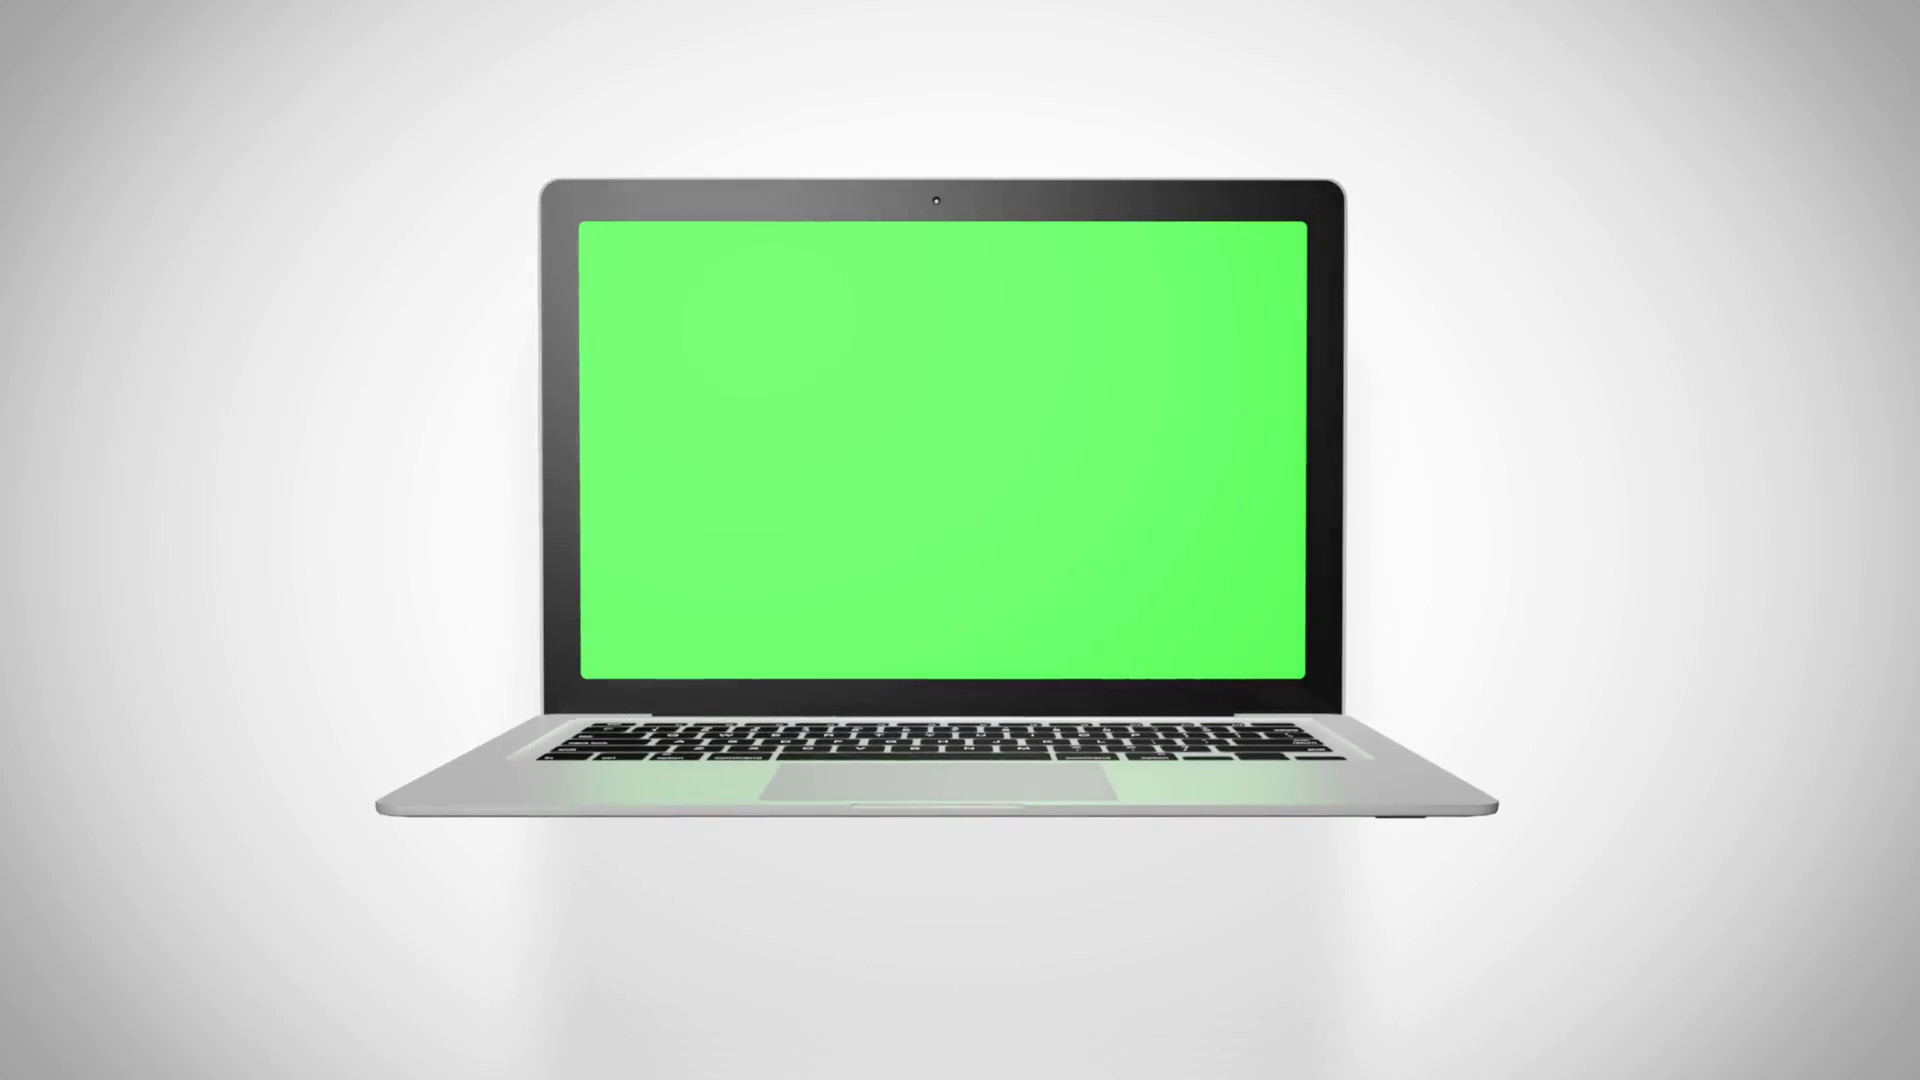 1920x1080 Laptop green screen on white background. Easily customizable computer screen.  Seamlessly loopable Motion Background - Storyblocks Video